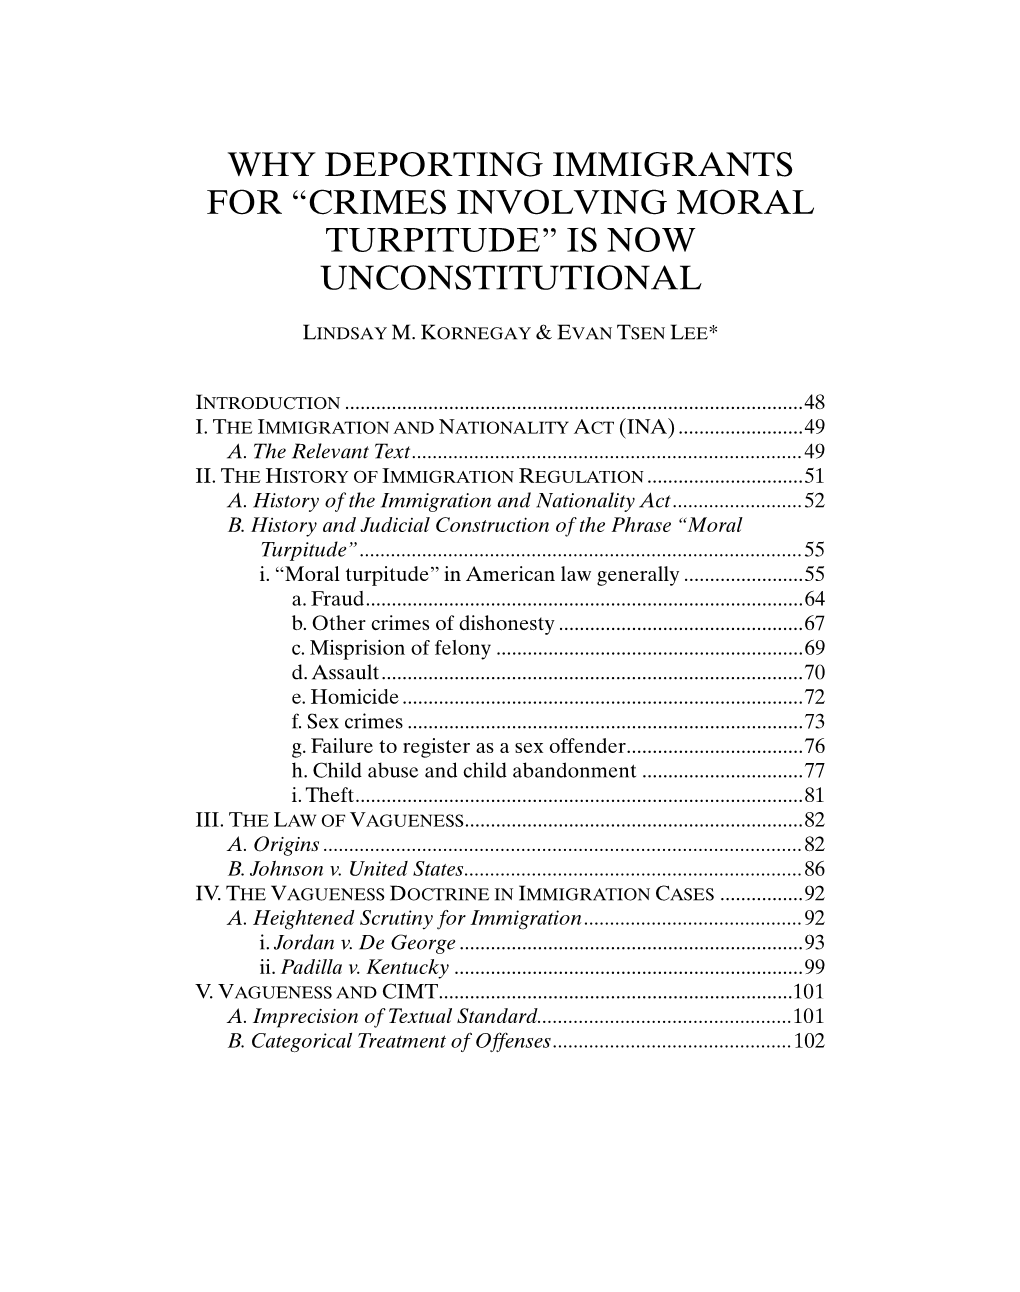 Why Deporting Immigrants for “Crimes Involving Moral Turpitude” Is Now Unconstitutional